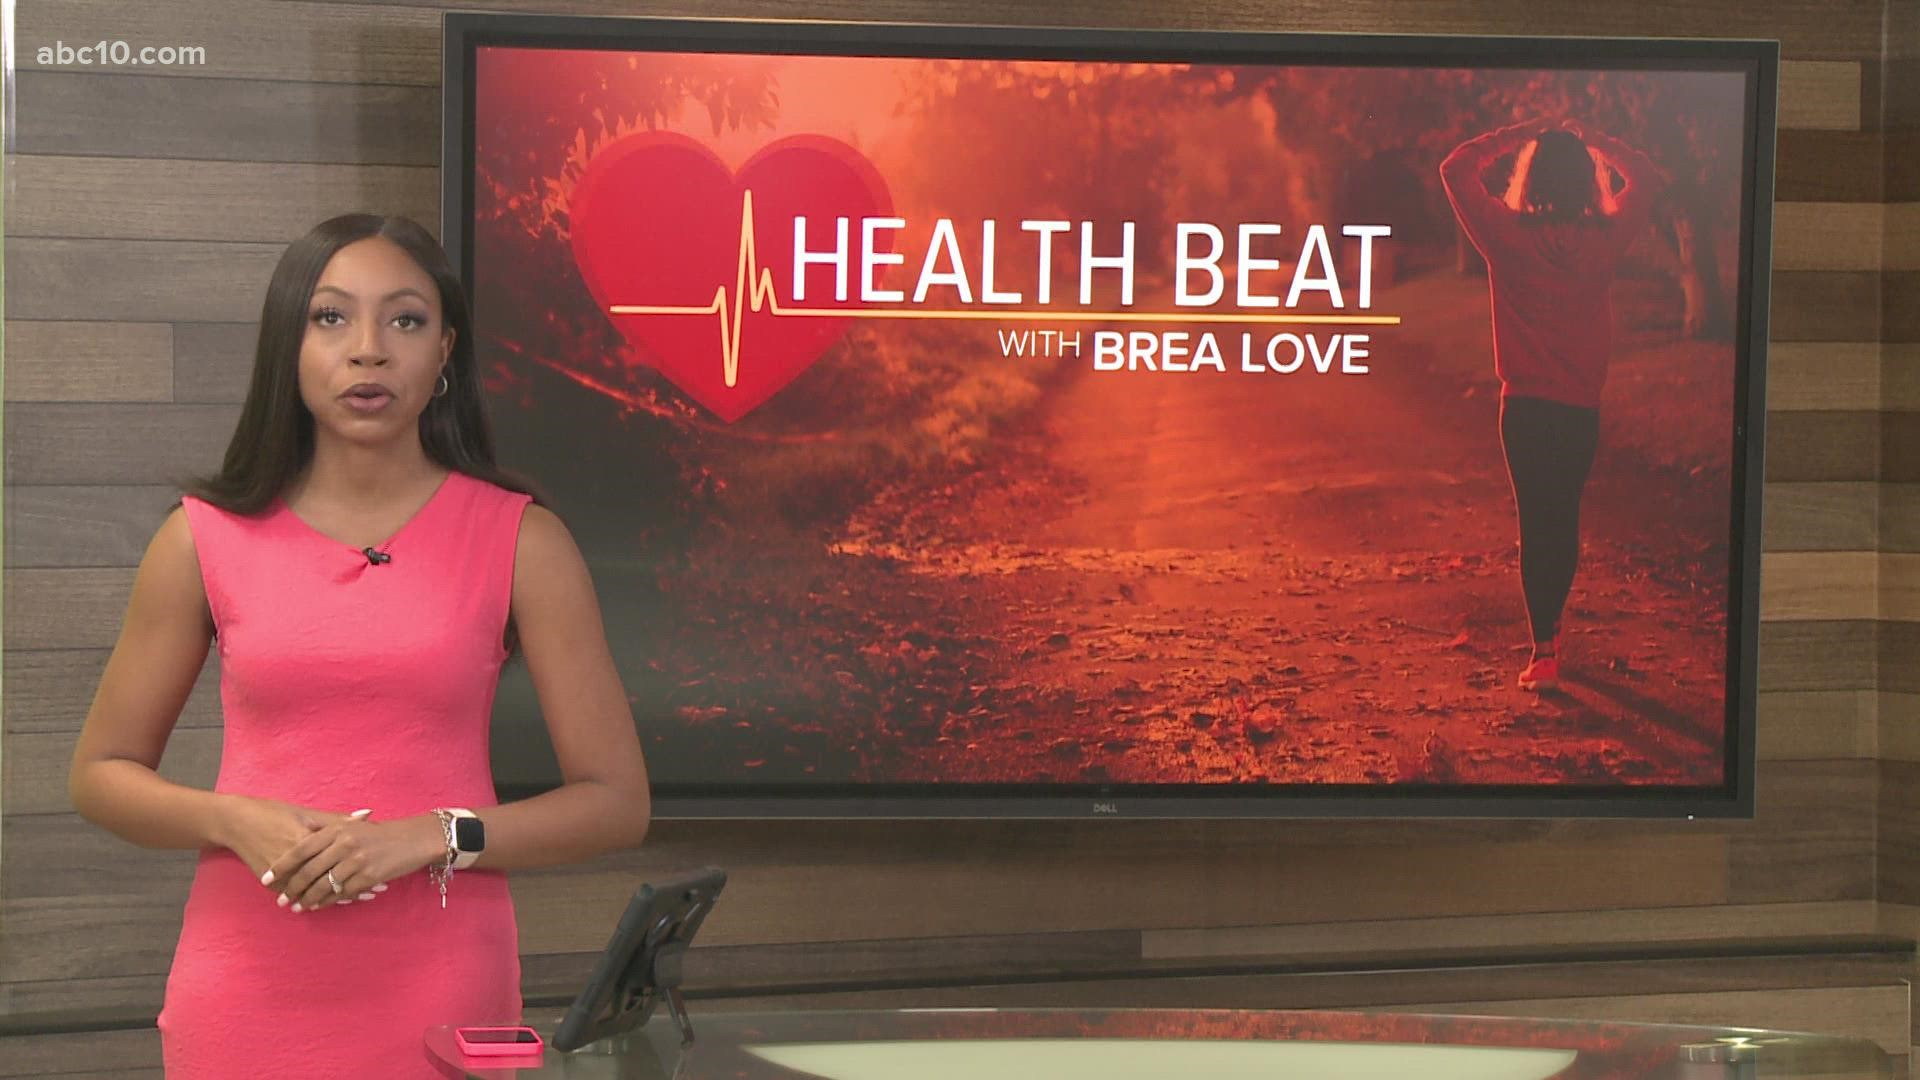 ABC10's Brea Love is back with another Health Beat, and this time she is addressing the topic of preventing and curing breast cancer.